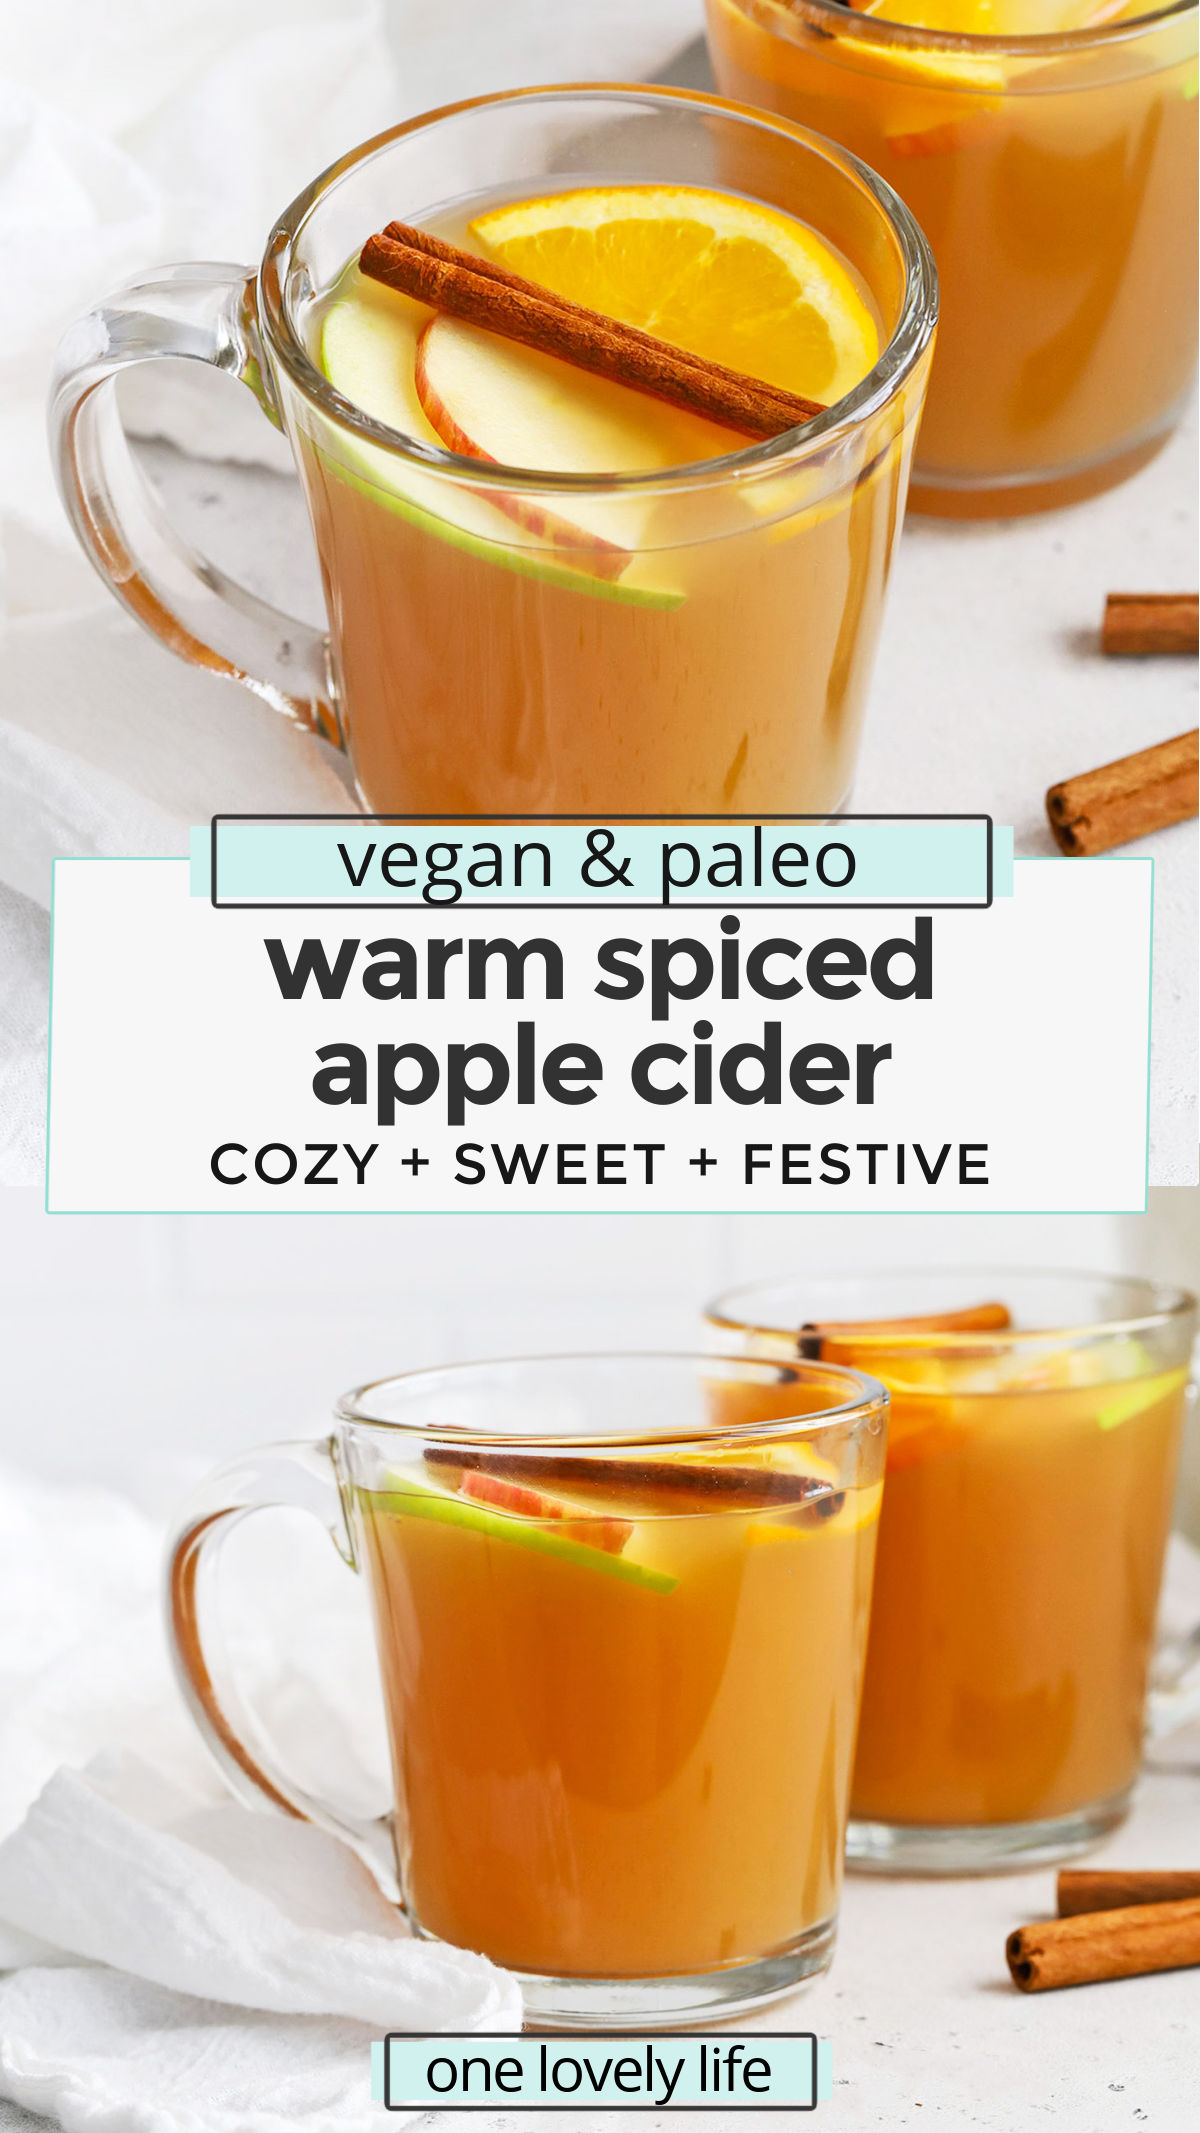 Cozy Spiced Cider - This easy spiced apple cider recipe smells and tastes incredible. The perfect blend of flavors and spices! (Naturally paleo & Vegan) // Spiced Cider Recipe // Naturally sweetened spiced cider // healthy fall drink // warm drinks // holiday drinks // non-alcoholic drinks // Christmas cider drink // hot drinks #cider #spicedcider #paleo #vegan #glutenfree #holidaydrink #warmdrink